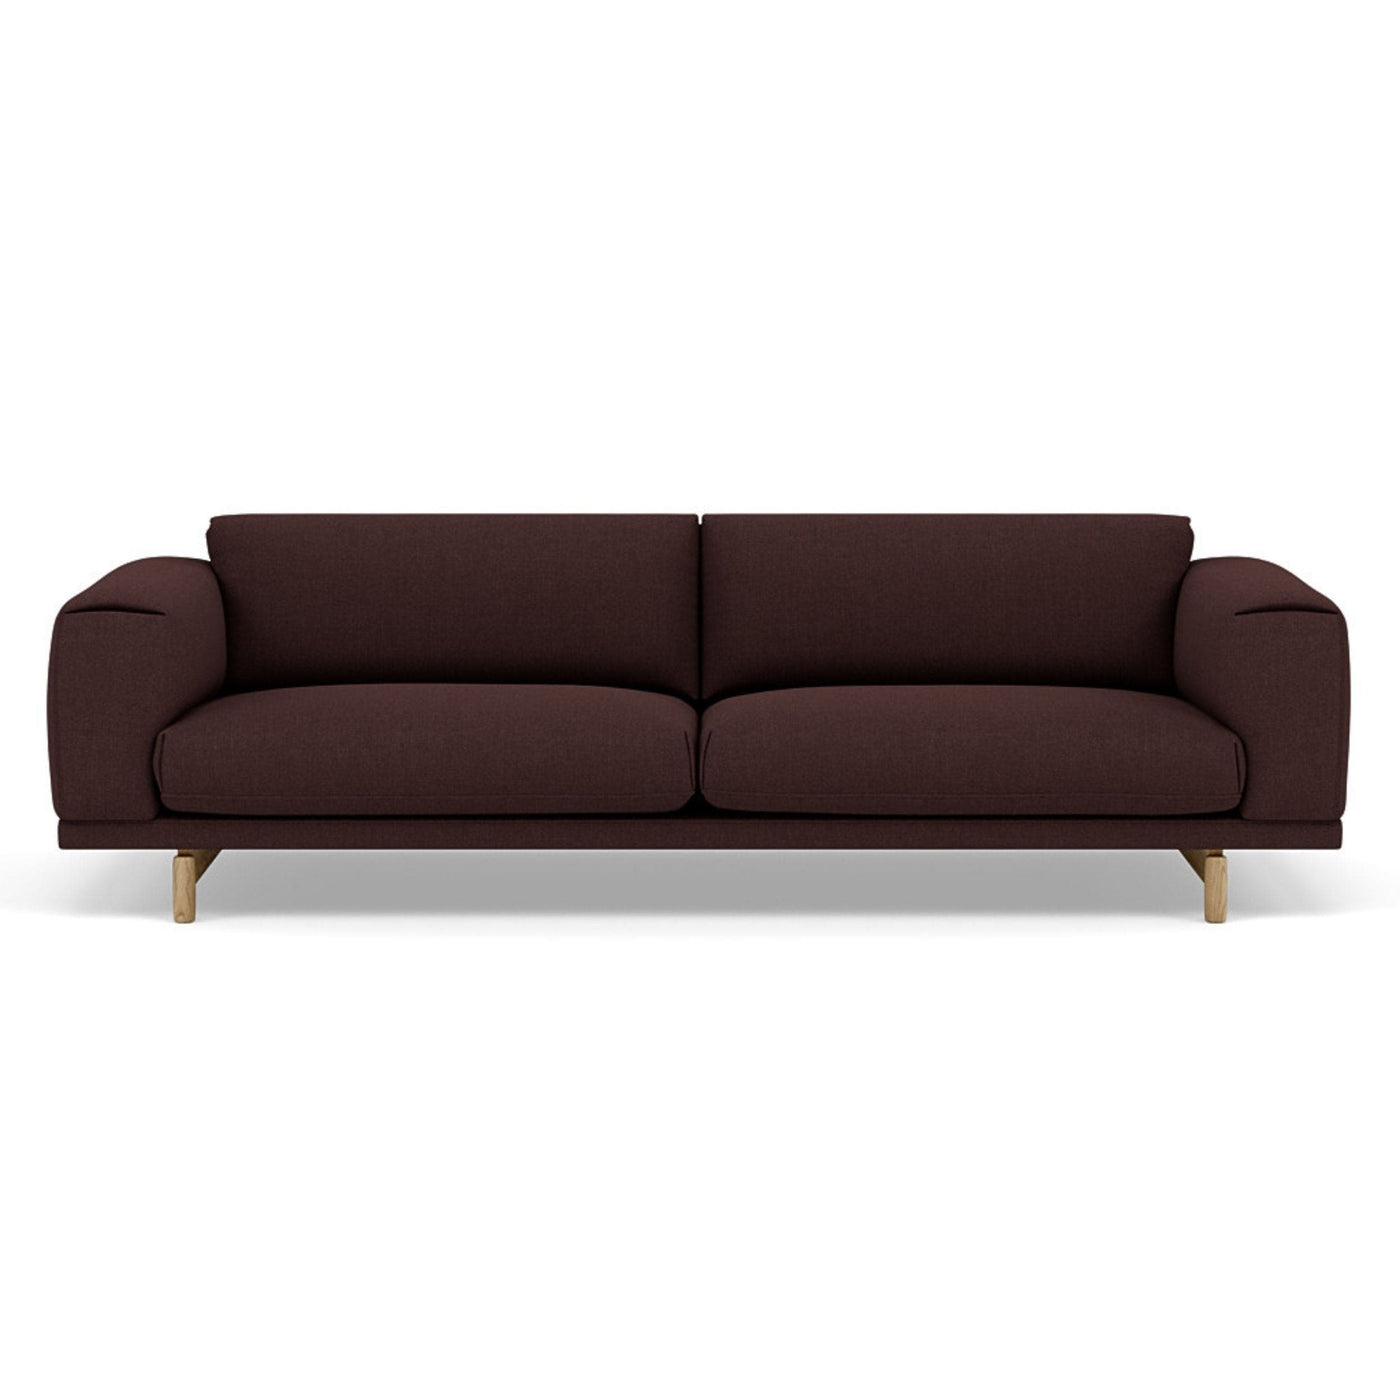 Muuto Rest Sofa 3 Seater in Remix 373 red. Made to order from someday designs. #colour_remix-373-red